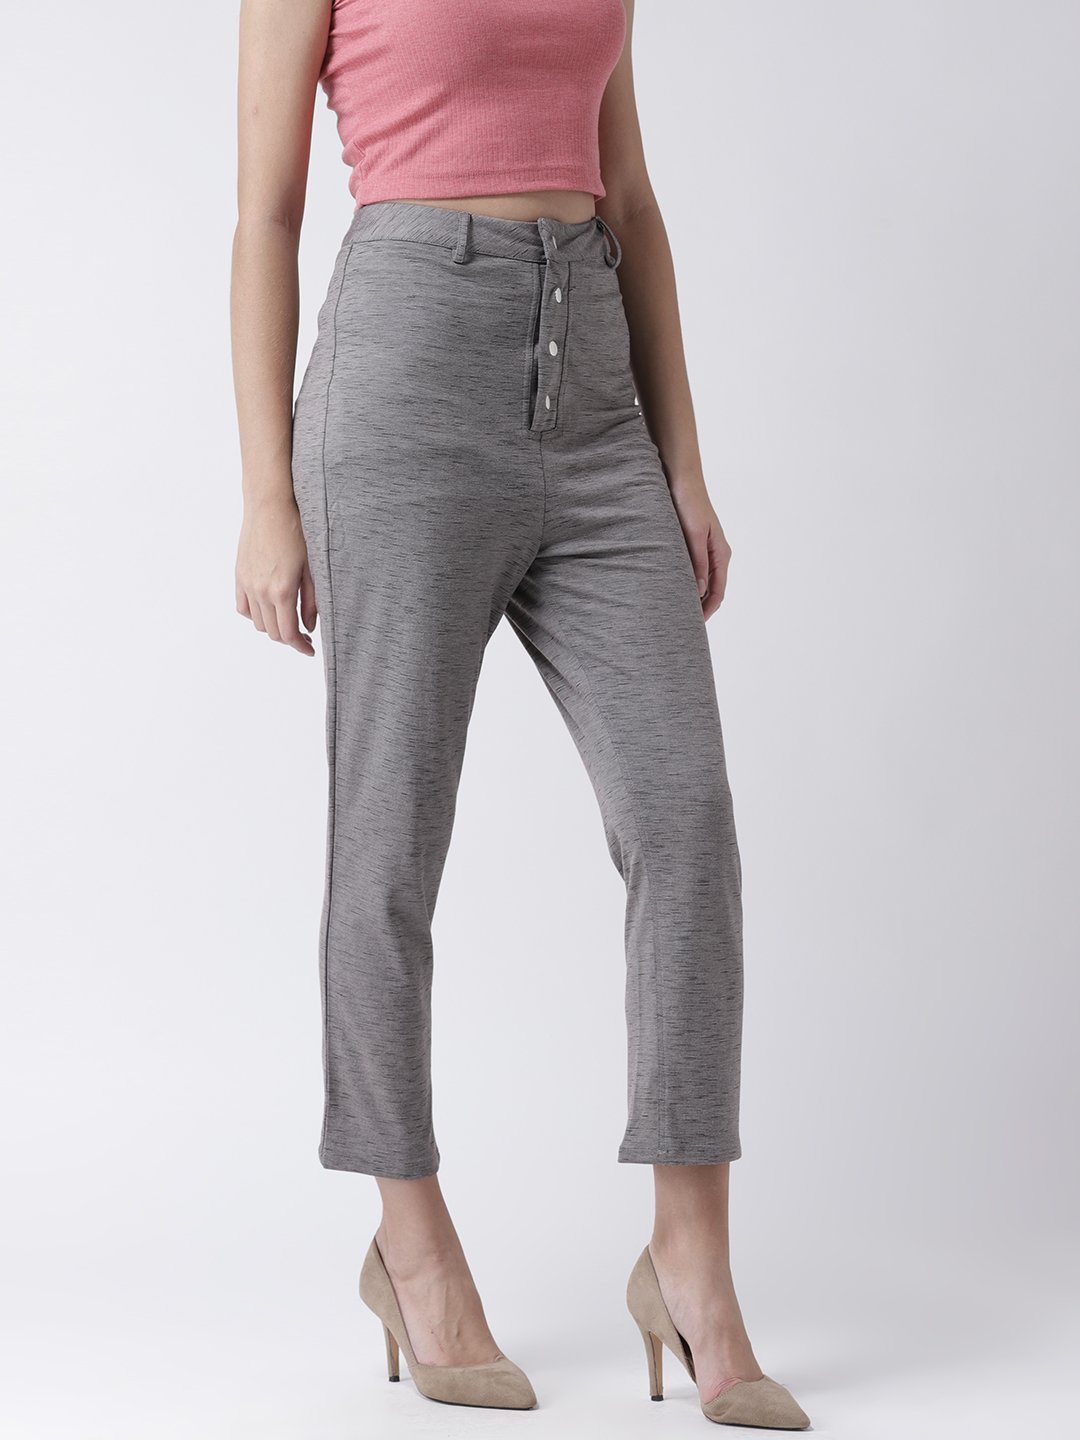 Dashed Grey High Waisted Trousers with Button detail